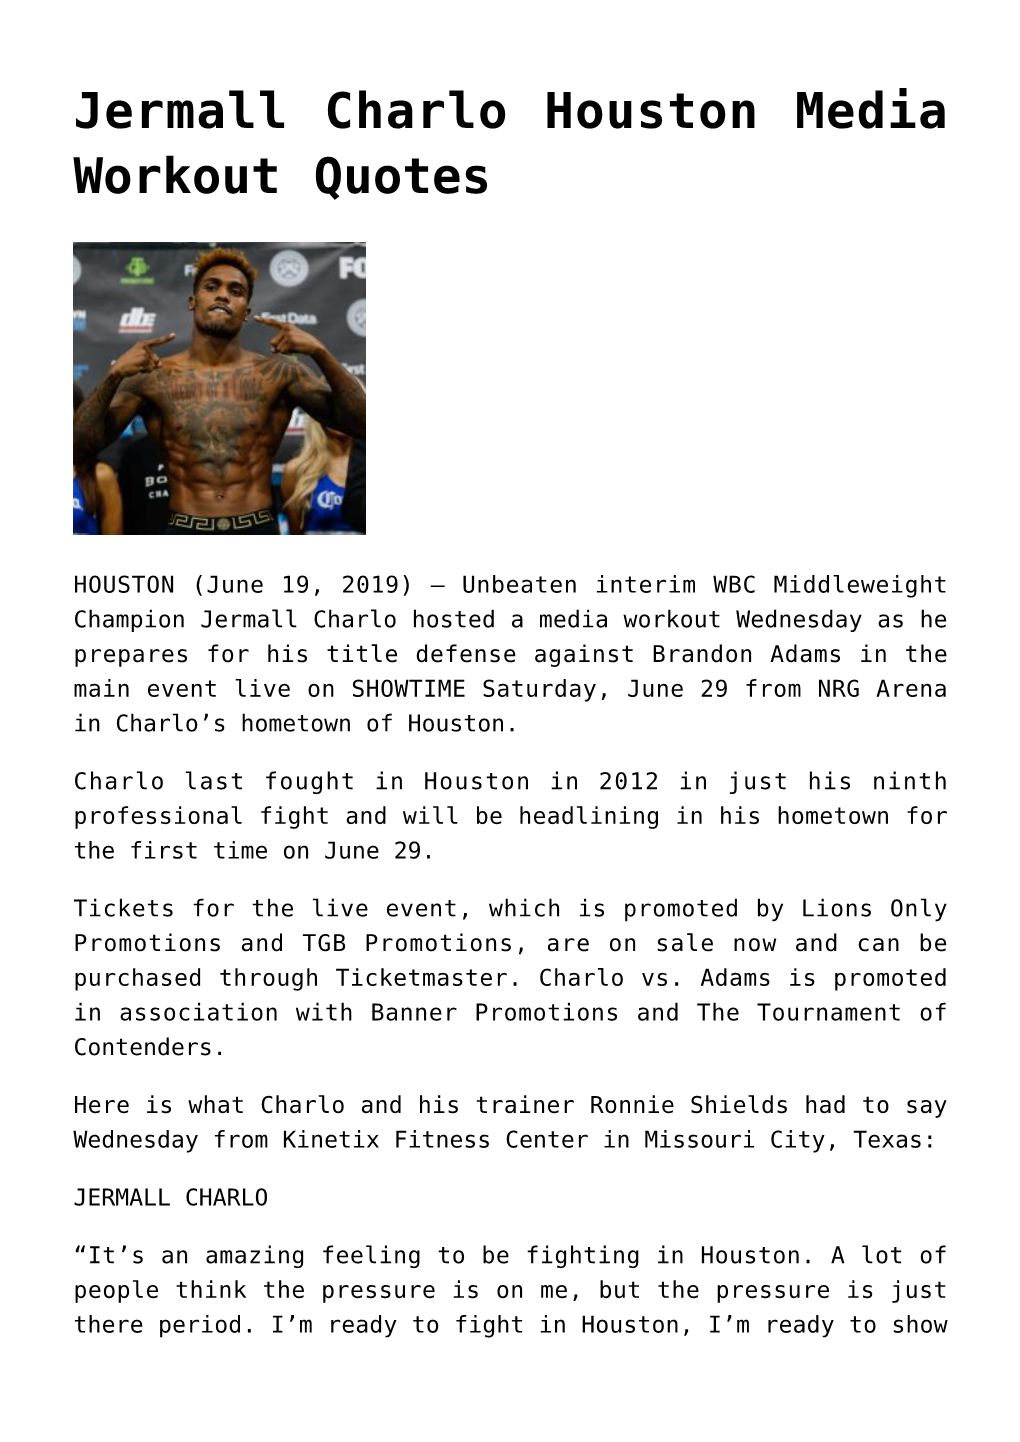 Jermall Charlo Houston Media Workout Quotes